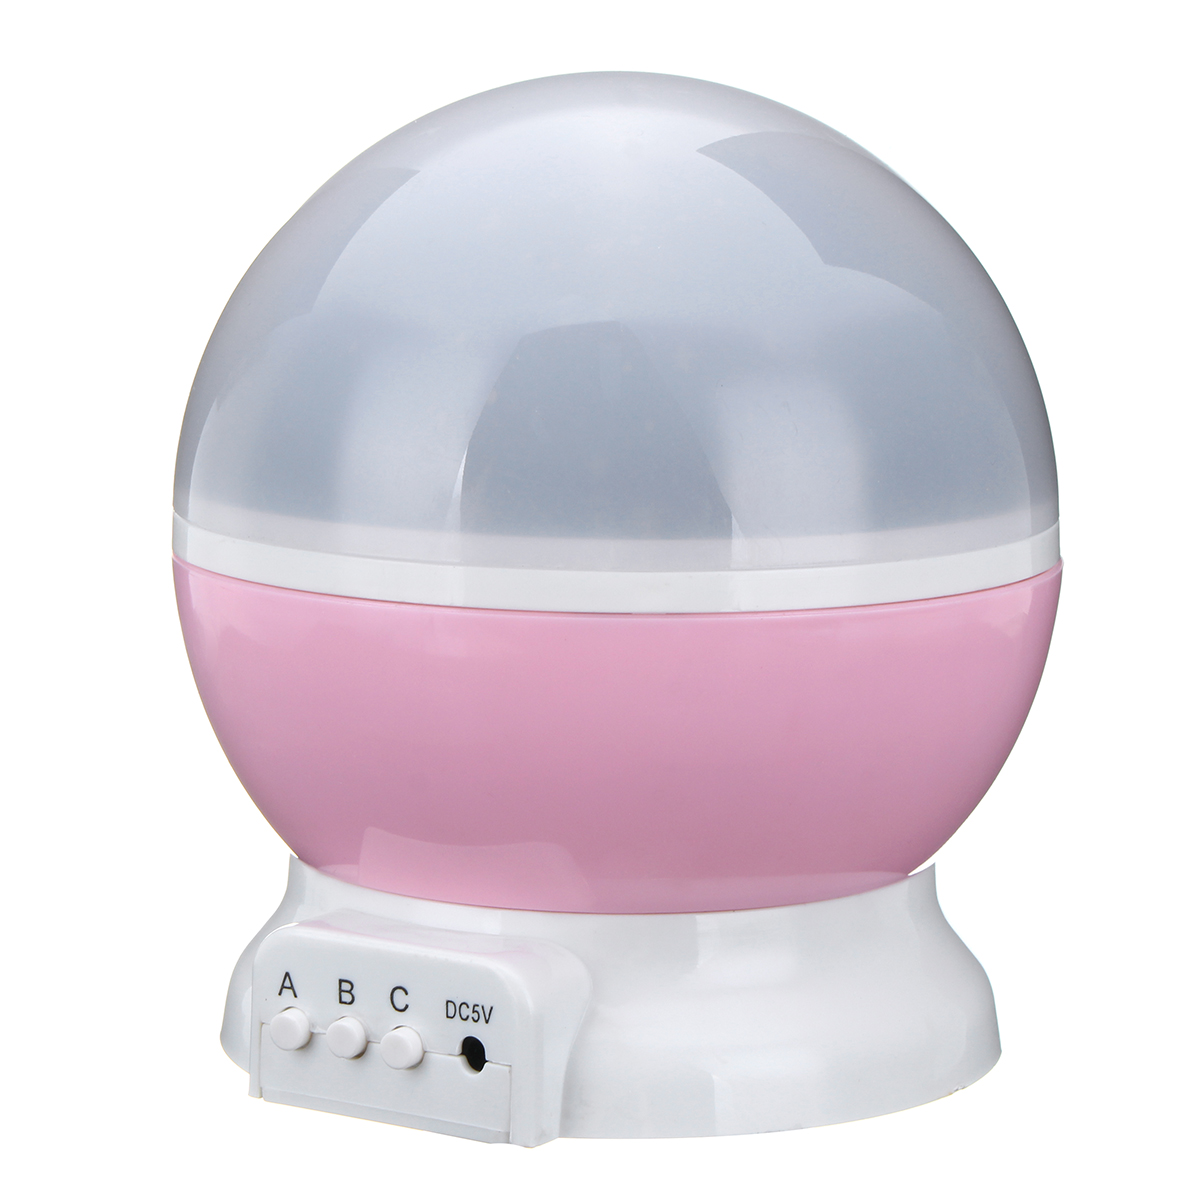 LED-Starry-Projector-Lamp-Baby-Night-Light-USB-Romantic-Rotating-Moon-Cosmos-Sky-Star-Projection-Lam-1937902-13